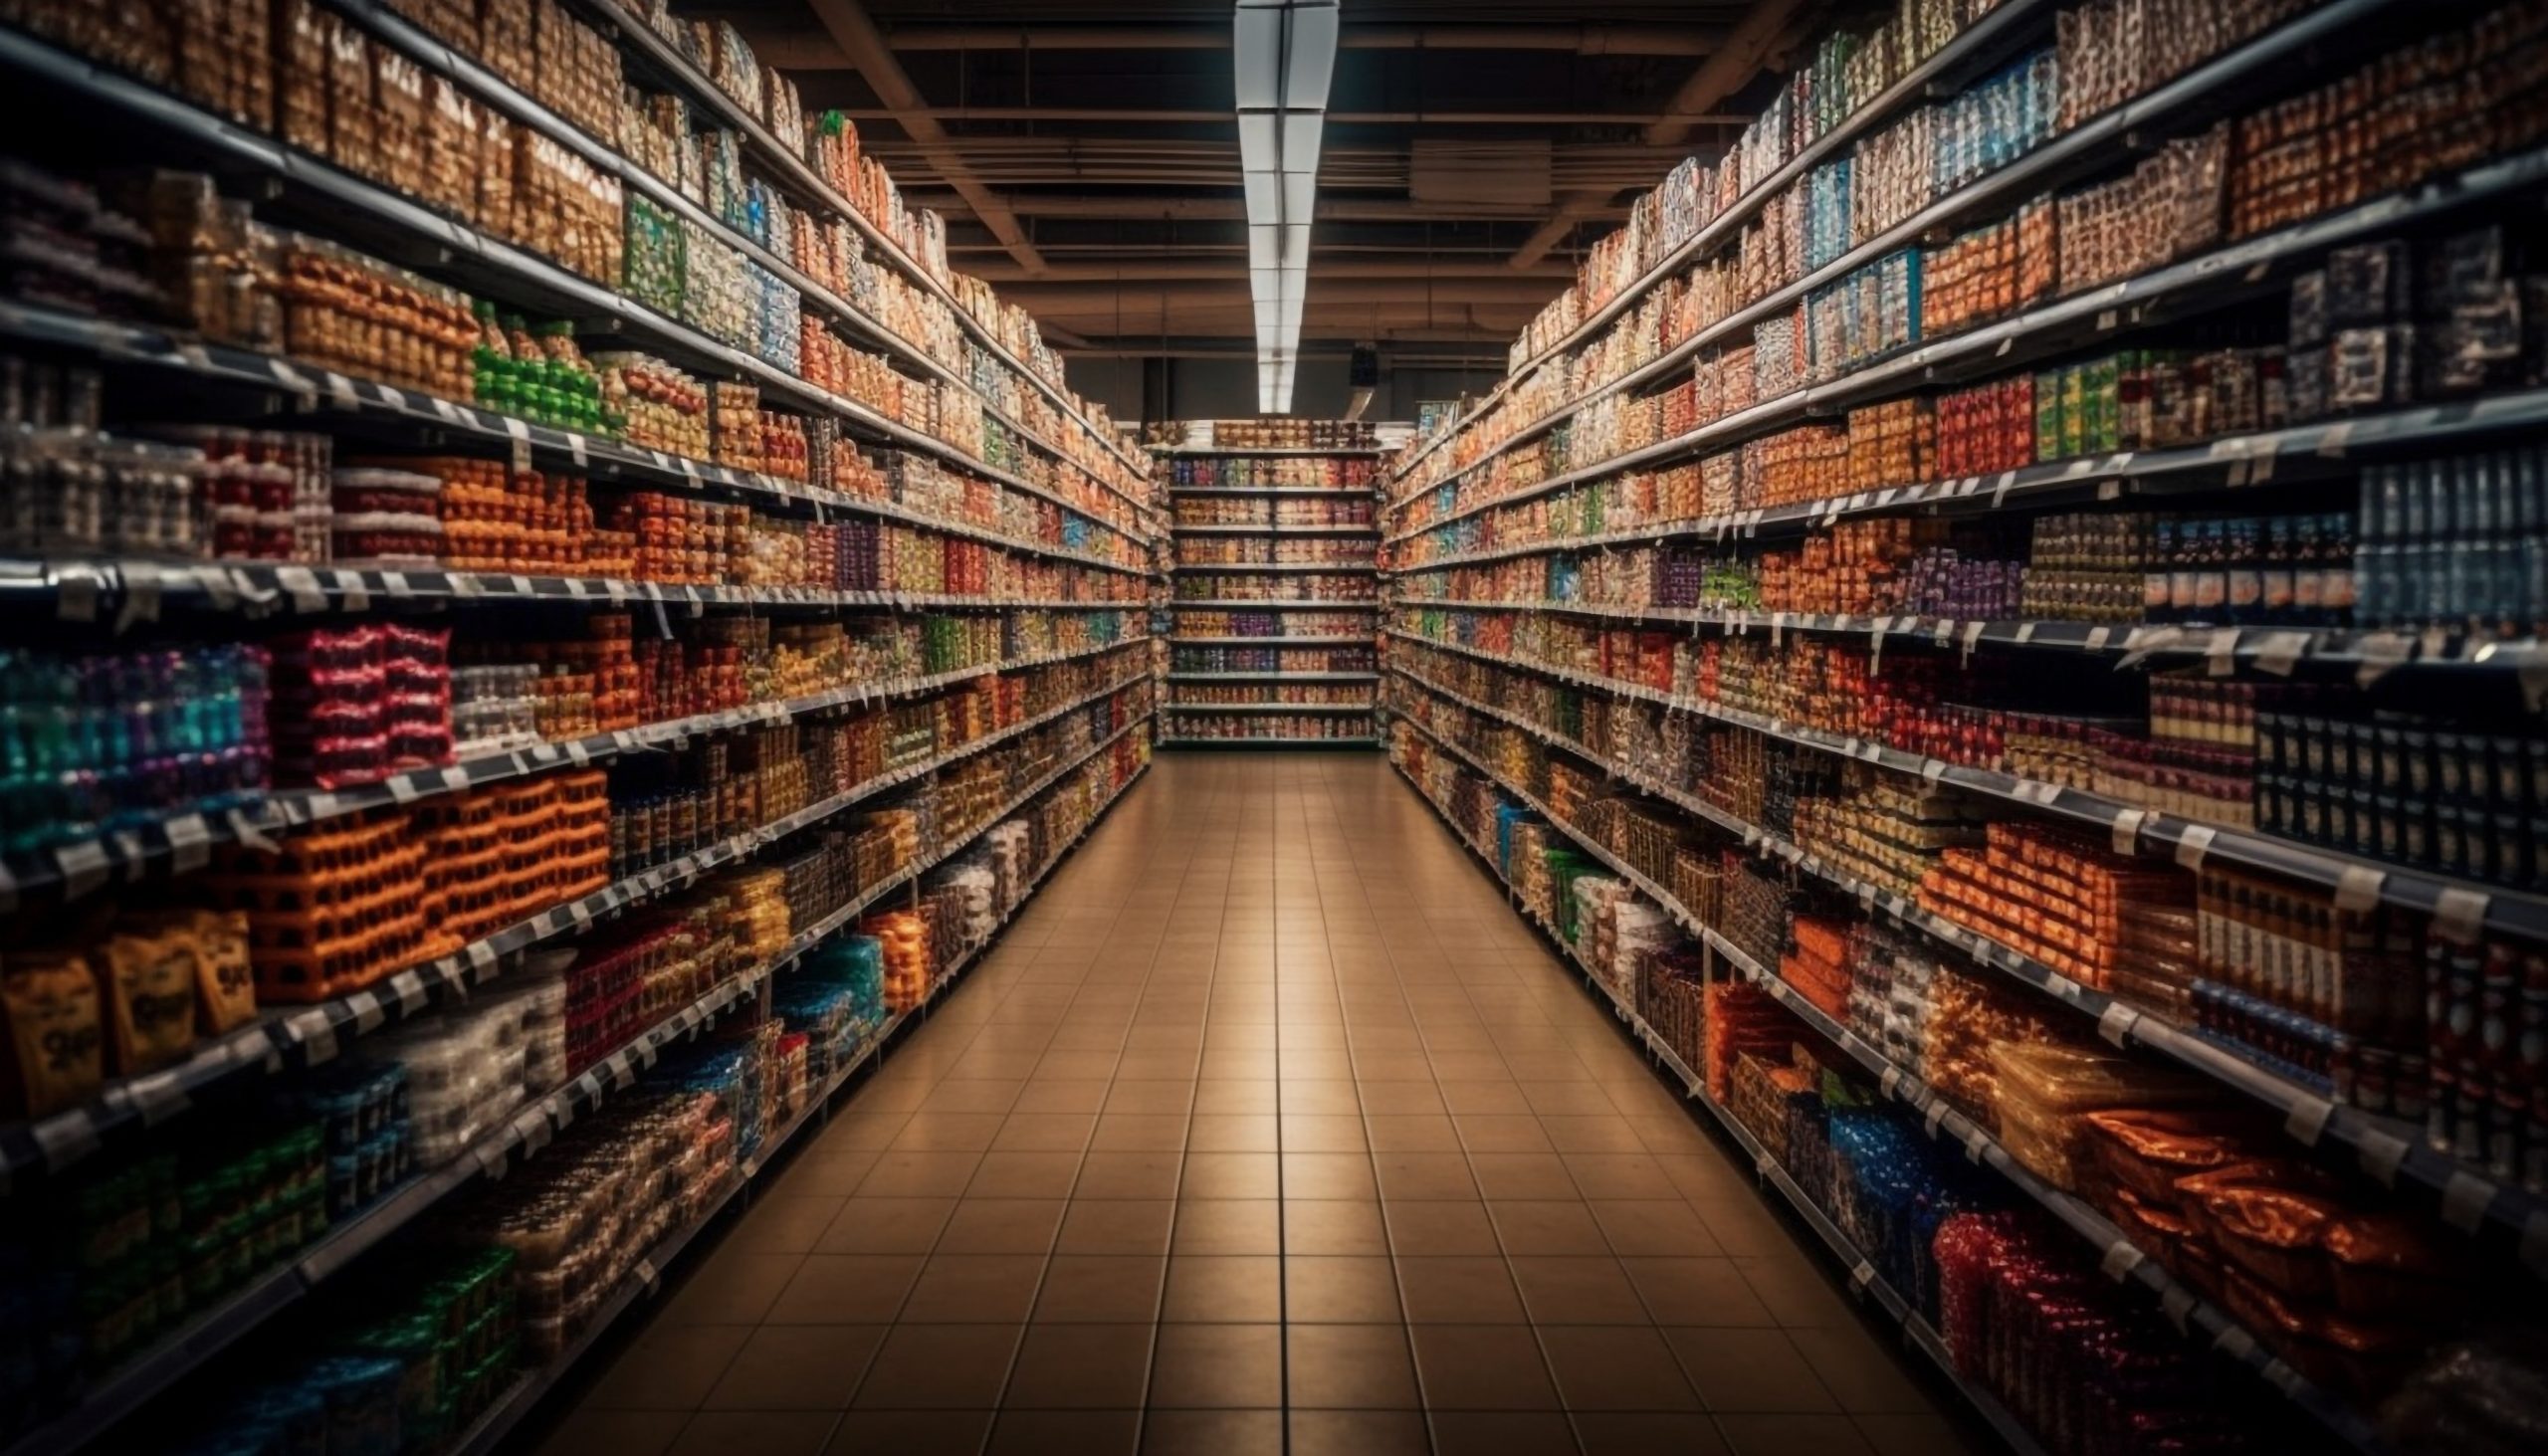 Abundance of healthy food choices in supermarket aisle generated by artificial intelligence